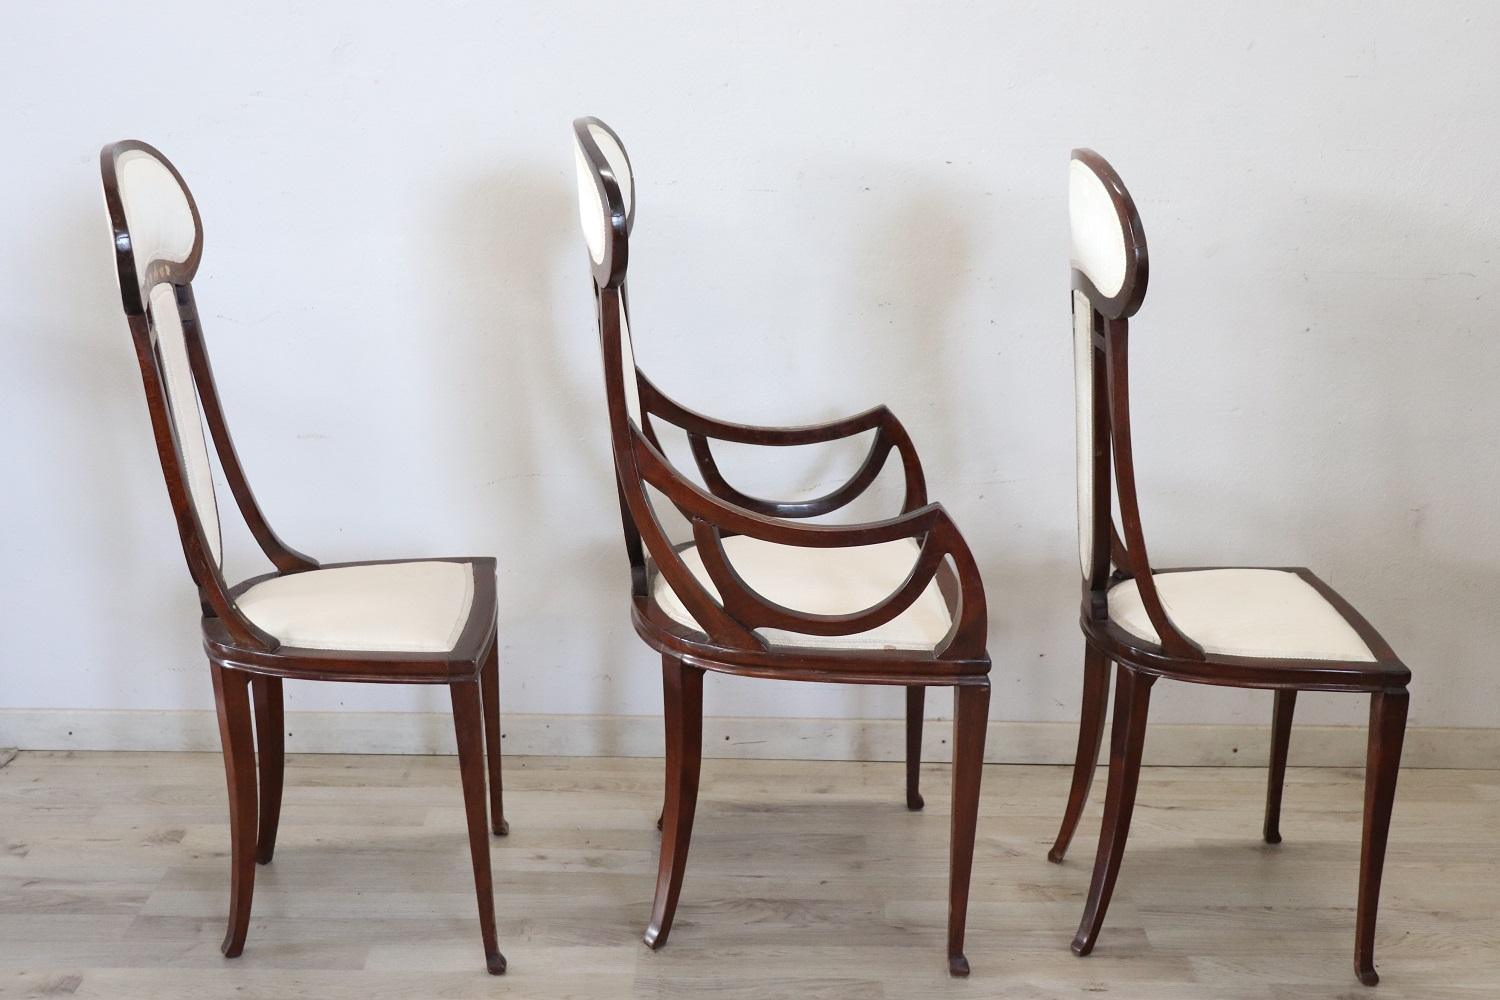 Spectacular Italian Art Nouveau Set of Armchair and 2 Chiars by Carlo Zen 1902s For Sale 9